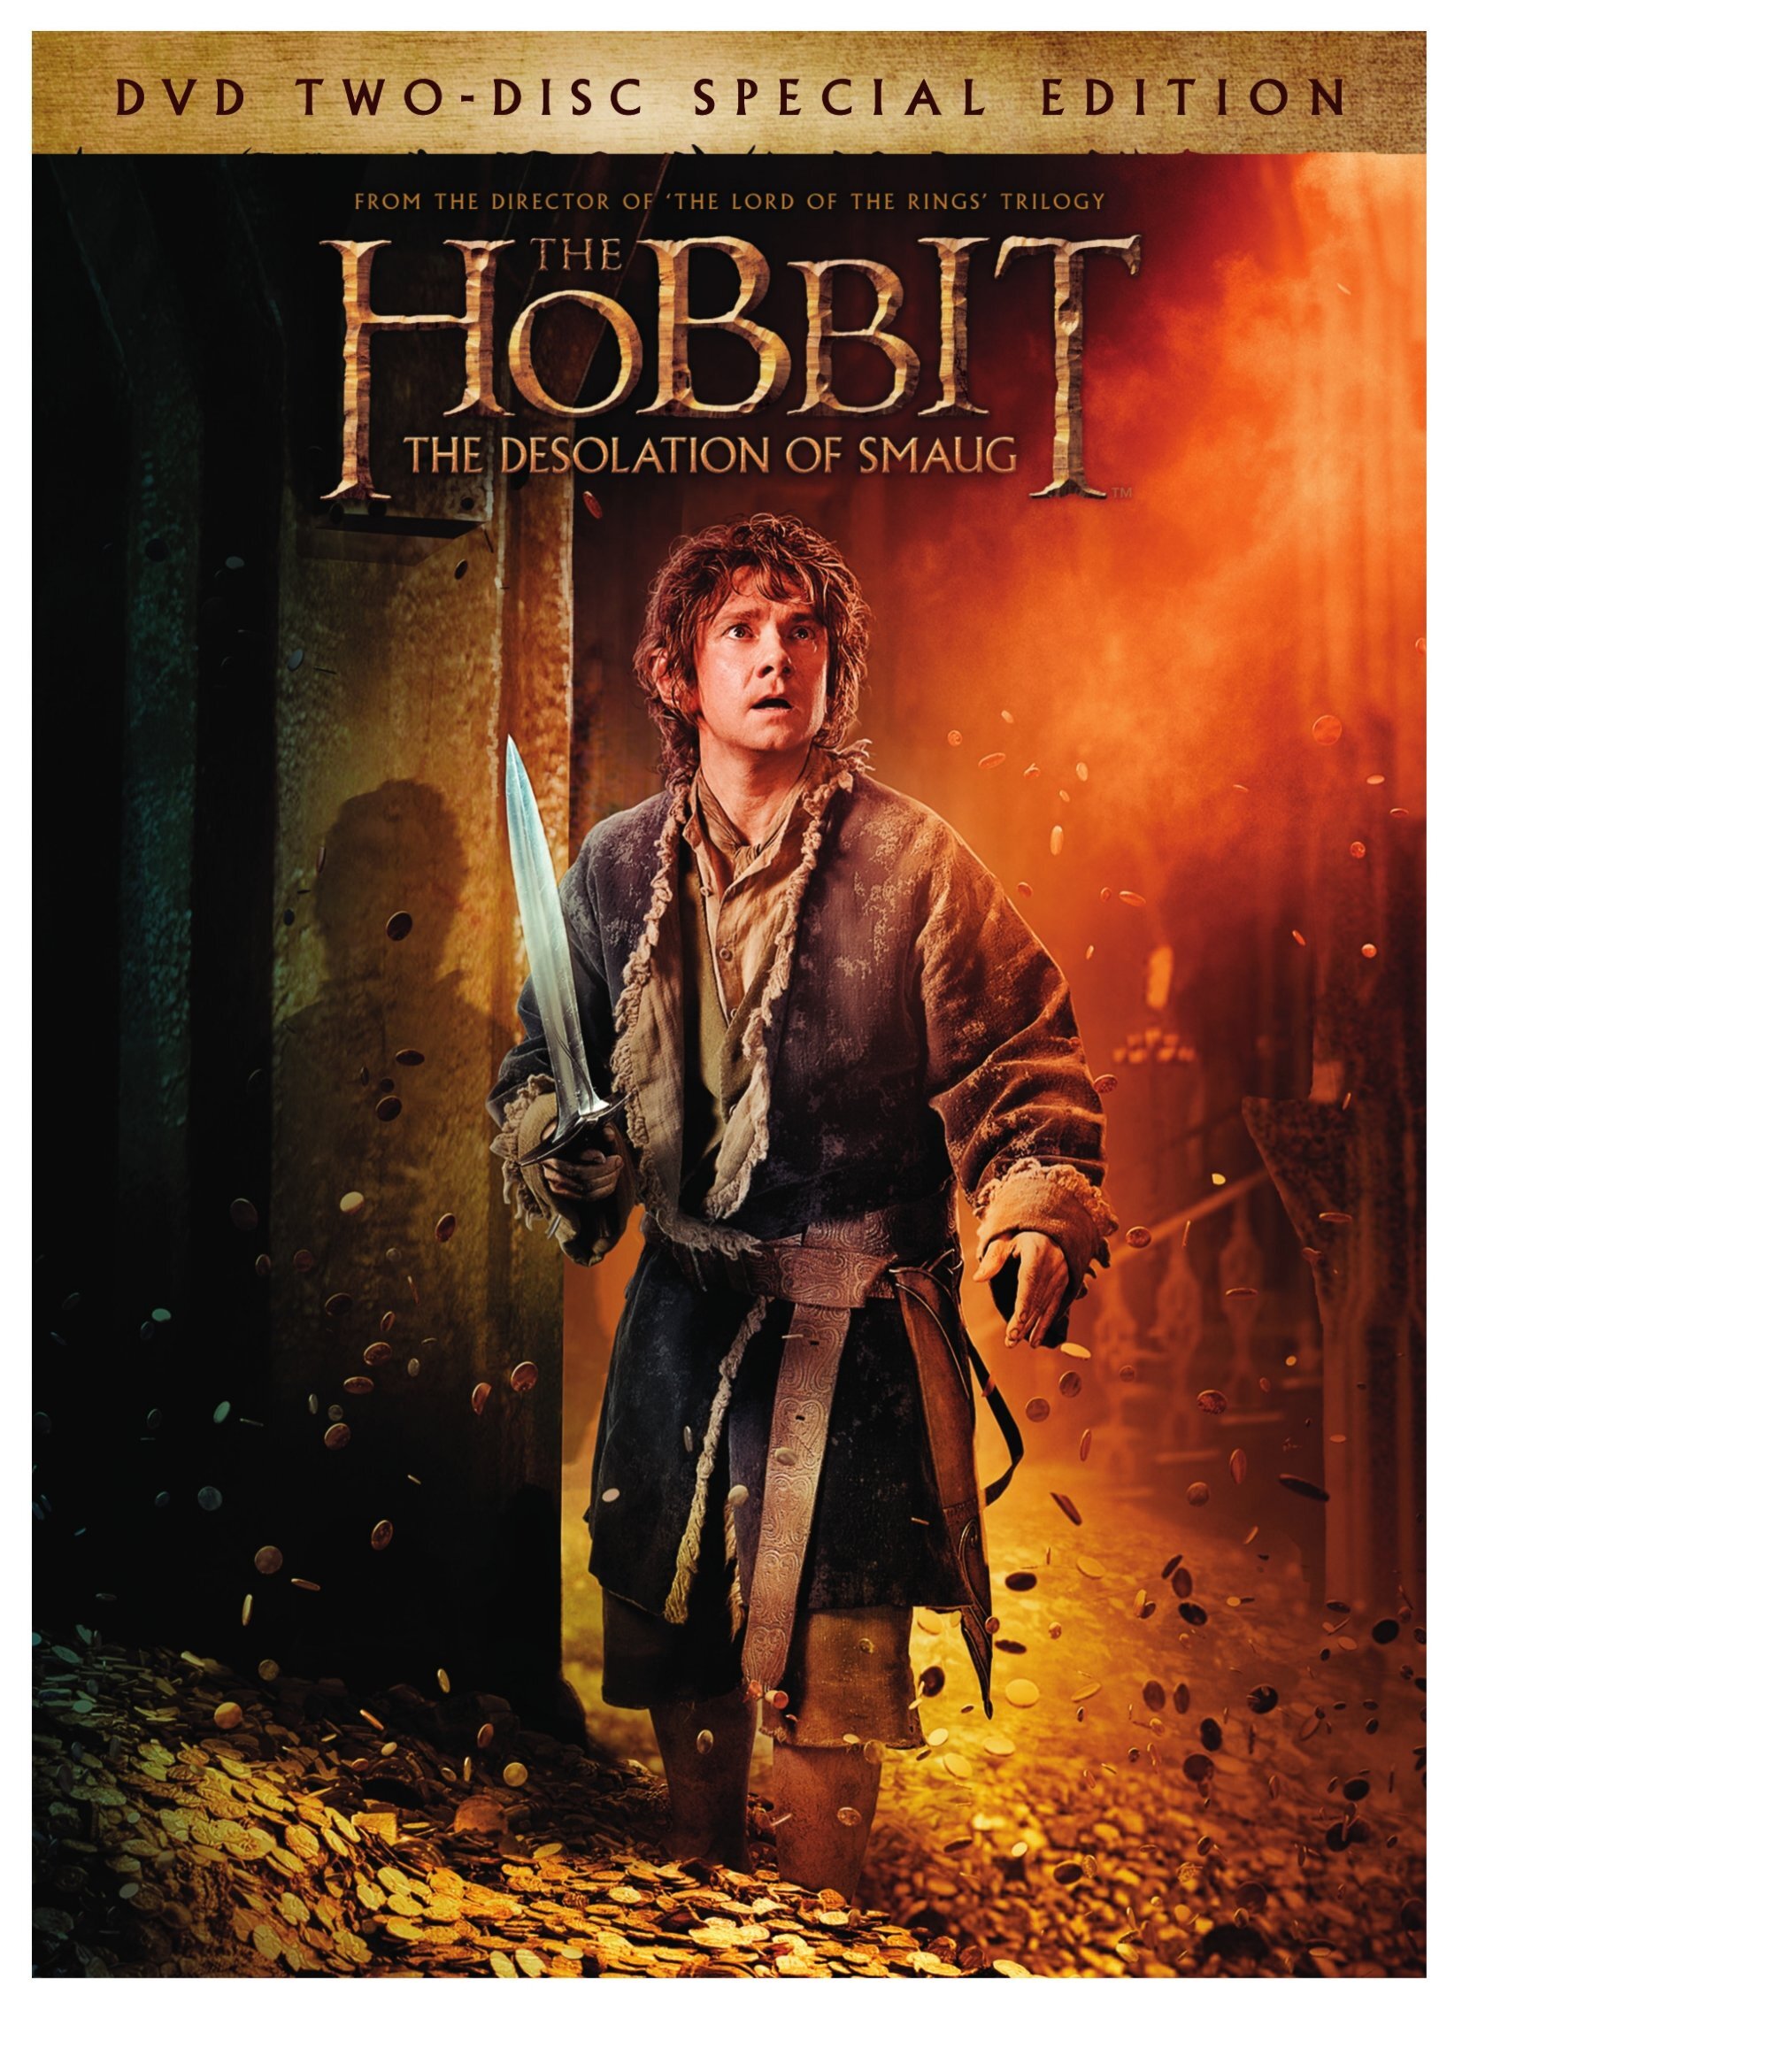 The Hobbit: The Desolation Of Smaug (Special Edition) - DVD [ 2013 ]  - Adventure Movies On DVD - Movies On GRUV